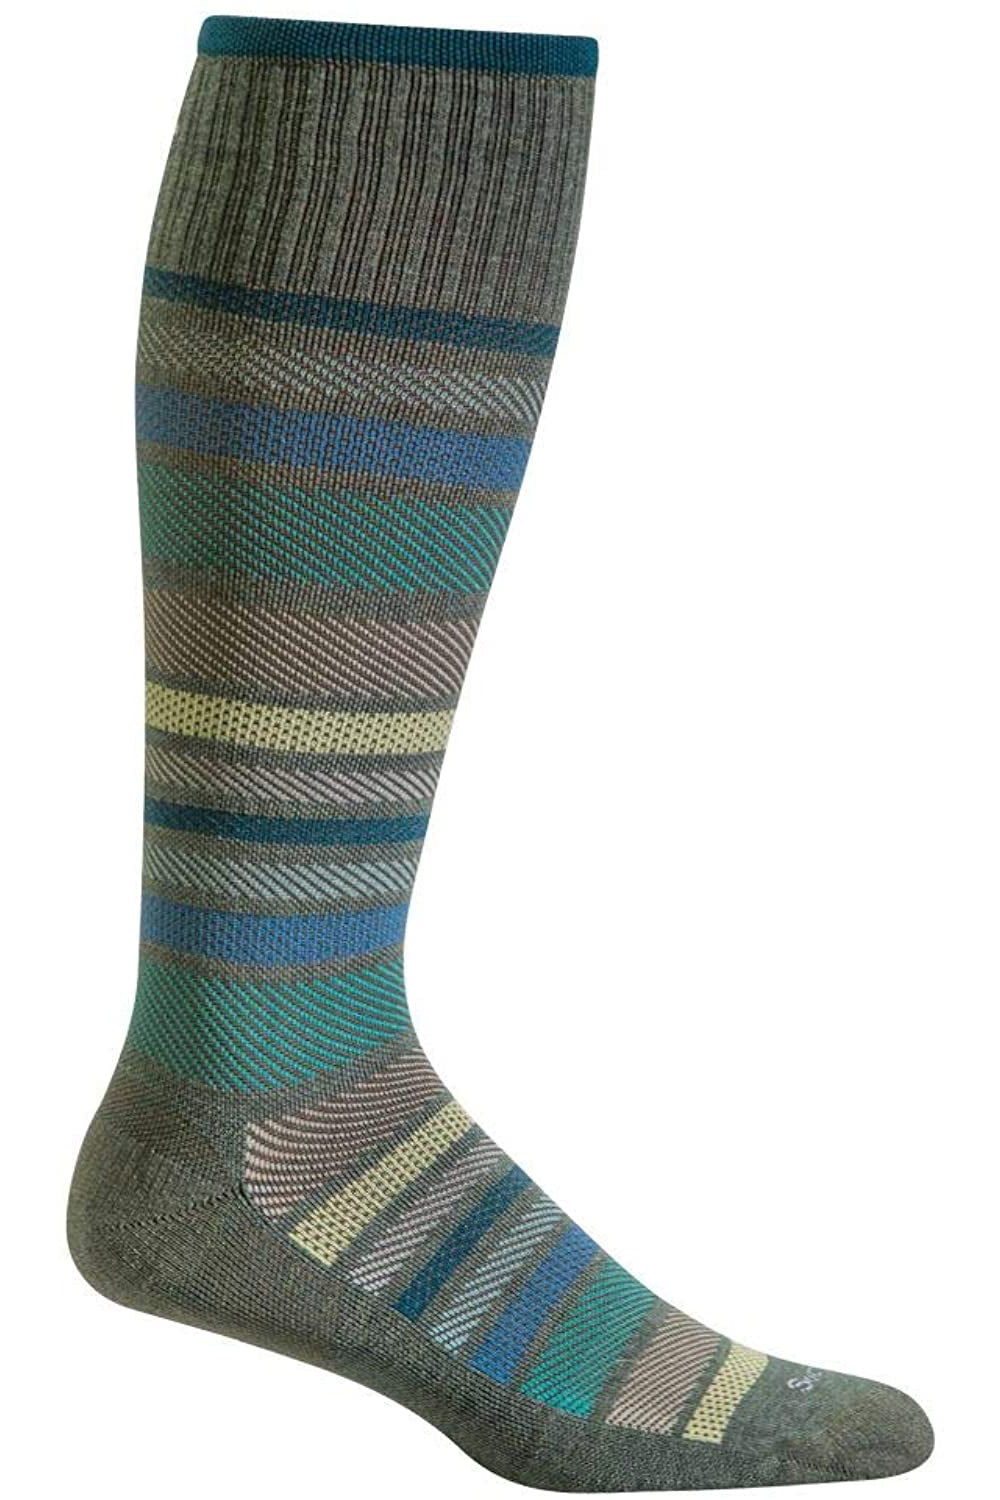 Sockwell Men's Twillful Compression Sock in Eucalyptus color from the side